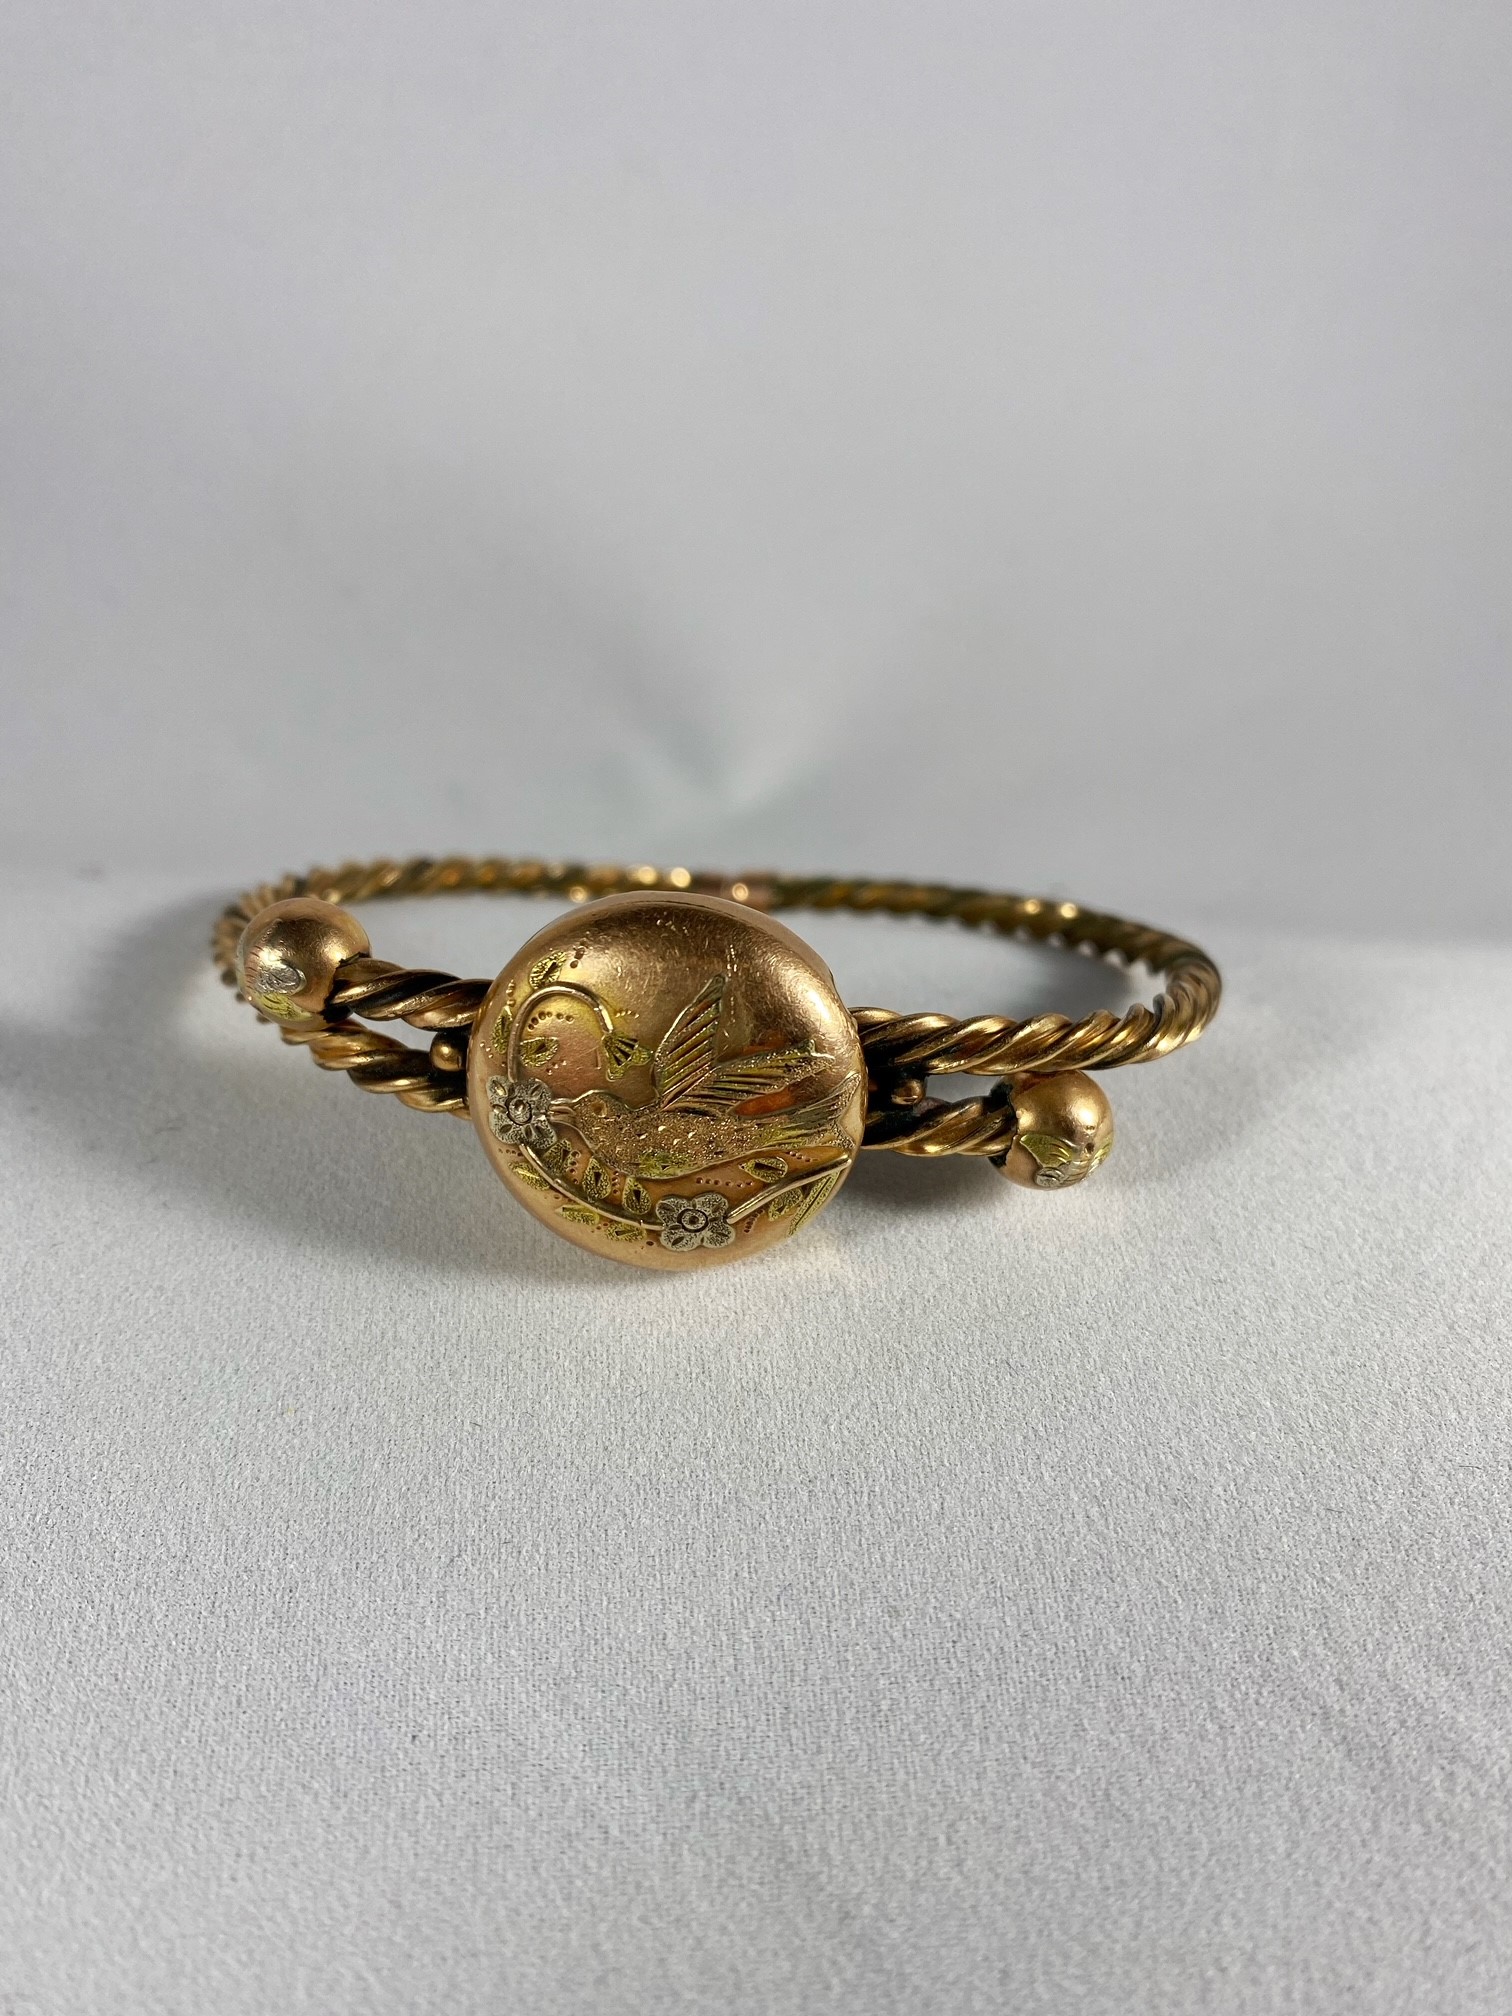 Lot 703: Copper Colored Bangle with Hummingbird